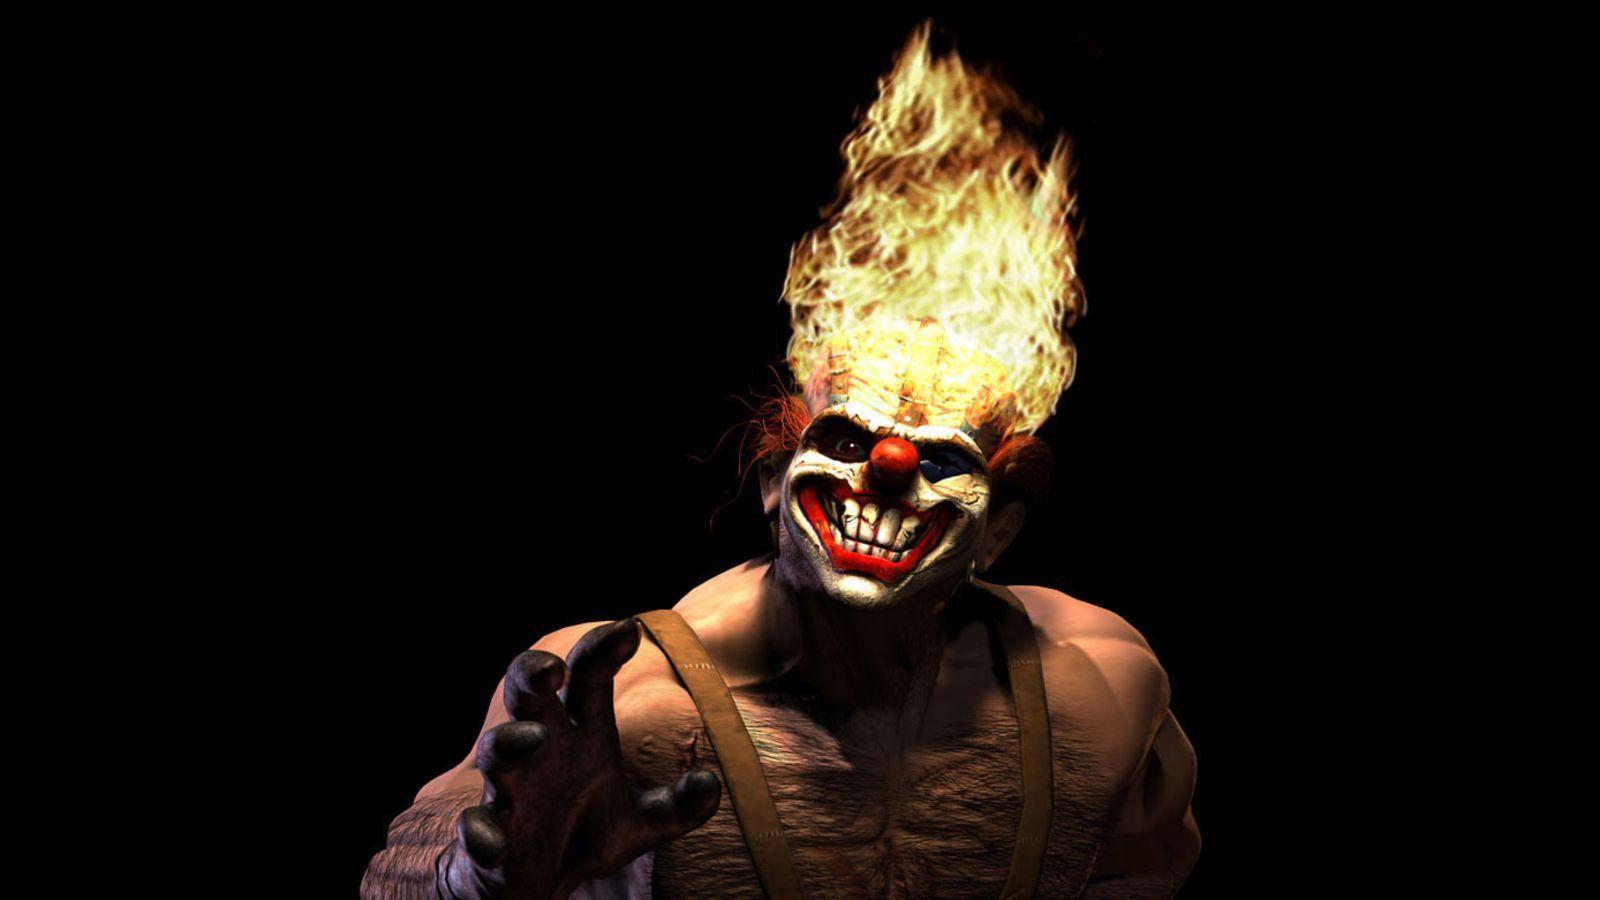 Image showing Twisted Metal's Sweet Tooth character